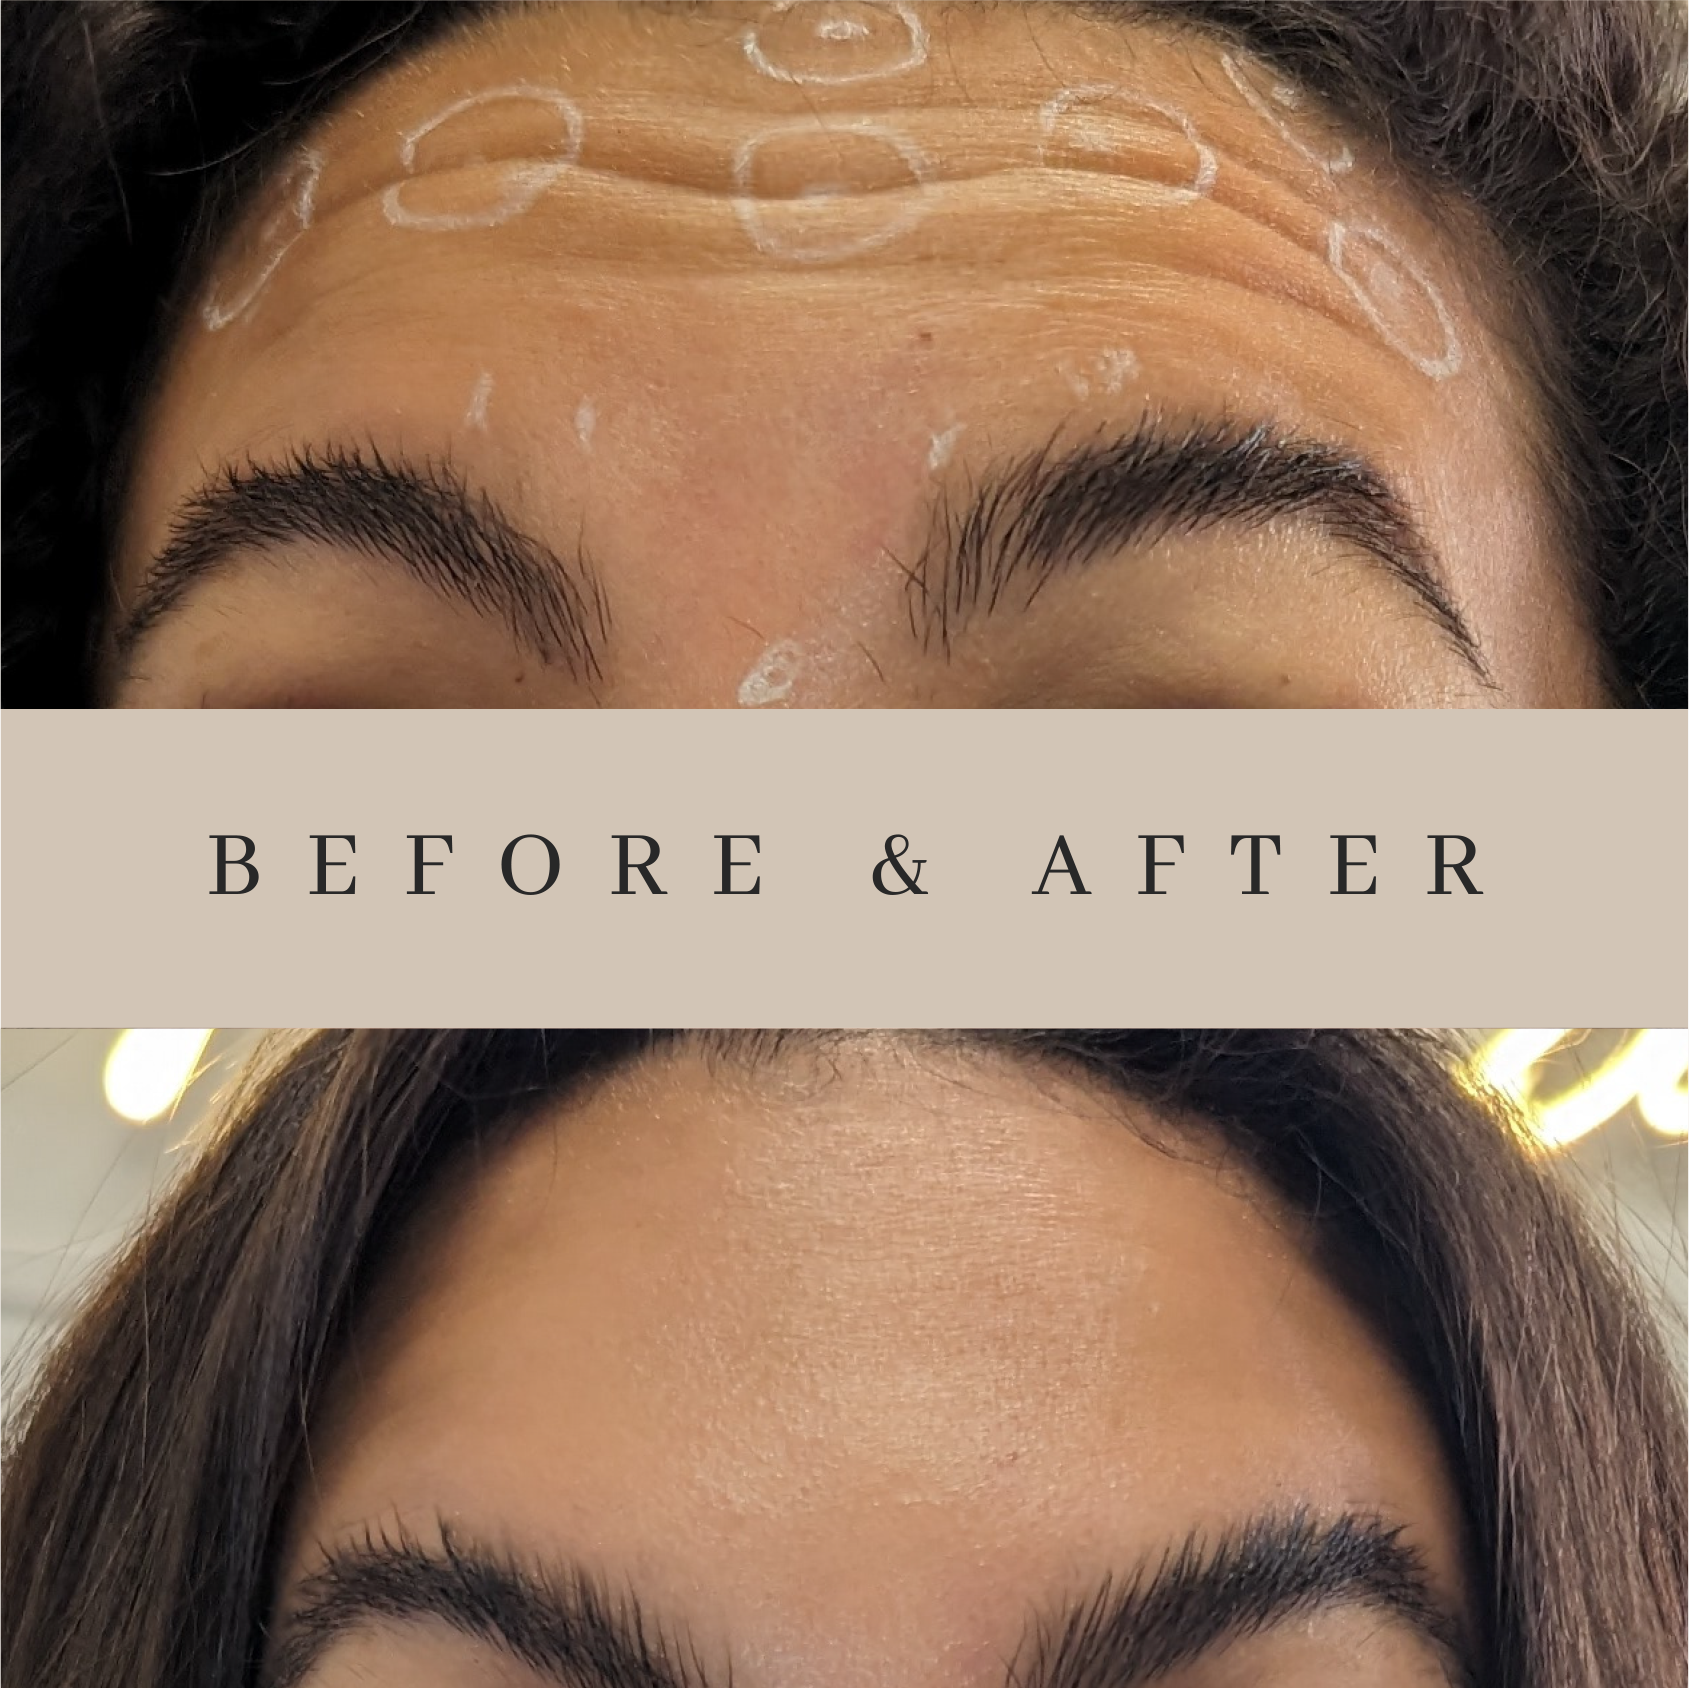 A before and after photo of a woman 's forehead